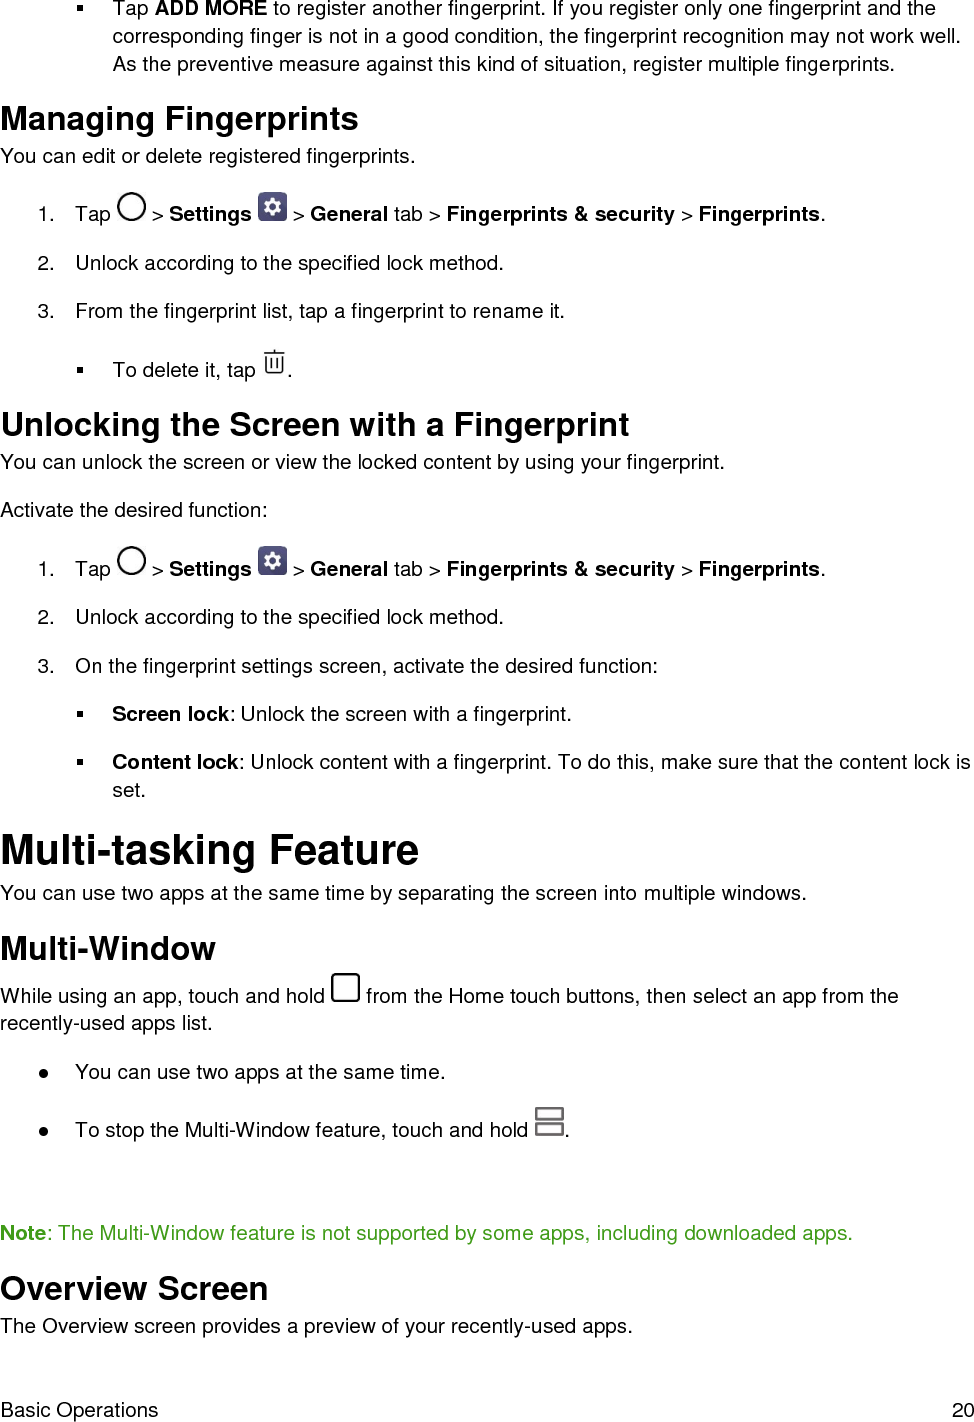  Basic Operations  20   Tap ADD MORE to register another fingerprint. If you register only one fingerprint and the corresponding finger is not in a good condition, the fingerprint recognition may not work well. As the preventive measure against this kind of situation, register multiple fingerprints. Managing Fingerprints You can edit or delete registered fingerprints.  1.  Tap   &gt; Settings   &gt; General tab &gt; Fingerprints &amp; security &gt; Fingerprints. 2.  Unlock according to the specified lock method.  3.  From the fingerprint list, tap a fingerprint to rename it.    To delete it, tap  . Unlocking the Screen with a Fingerprint You can unlock the screen or view the locked content by using your fingerprint.  Activate the desired function:  1.  Tap   &gt; Settings   &gt; General tab &gt; Fingerprints &amp; security &gt; Fingerprints. 2.  Unlock according to the specified lock method.  3.  On the fingerprint settings screen, activate the desired function:   Screen lock: Unlock the screen with a fingerprint.   Content lock: Unlock content with a fingerprint. To do this, make sure that the content lock is set. Multi-tasking Feature You can use two apps at the same time by separating the screen into multiple windows. Multi-Window While using an app, touch and hold   from the Home touch buttons, then select an app from the recently-used apps list. ●  You can use two apps at the same time. ●  To stop the Multi-Window feature, touch and hold  .   Note: The Multi-Window feature is not supported by some apps, including downloaded apps. Overview Screen The Overview screen provides a preview of your recently-used apps. 